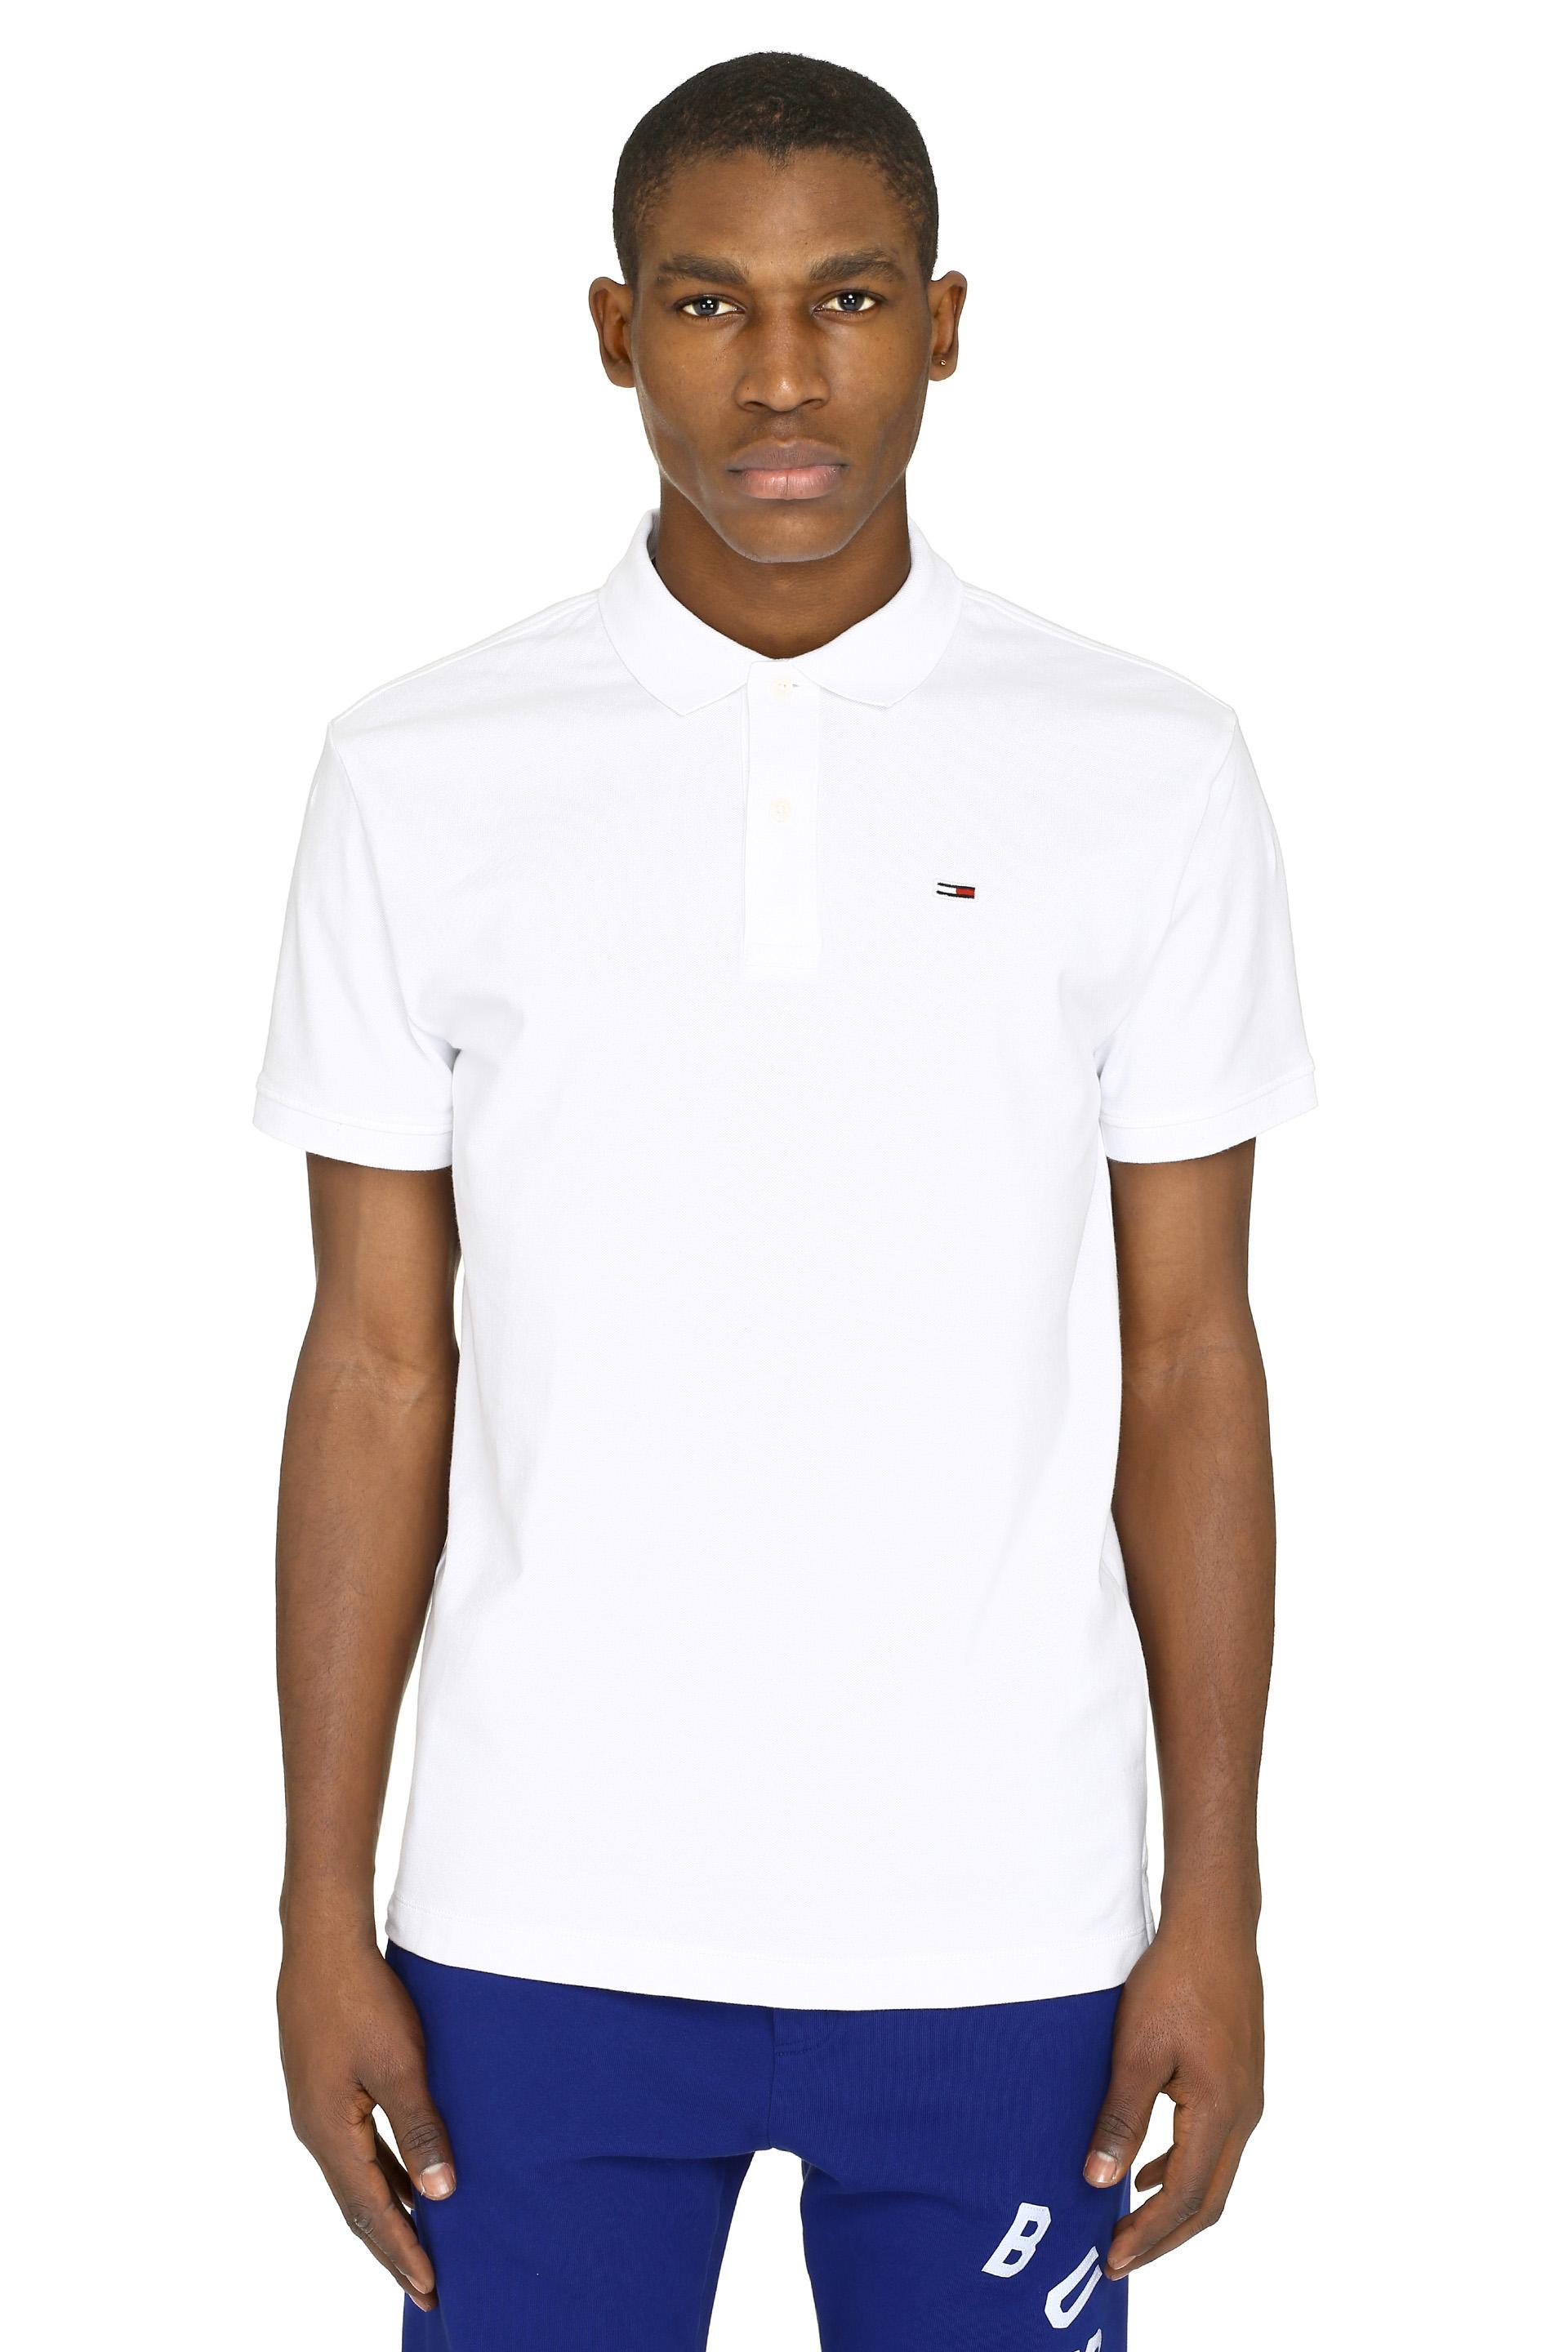 Tommy Hilfiger Stretch Cotton Piqué Polo Shirt in White for Men - Lyst